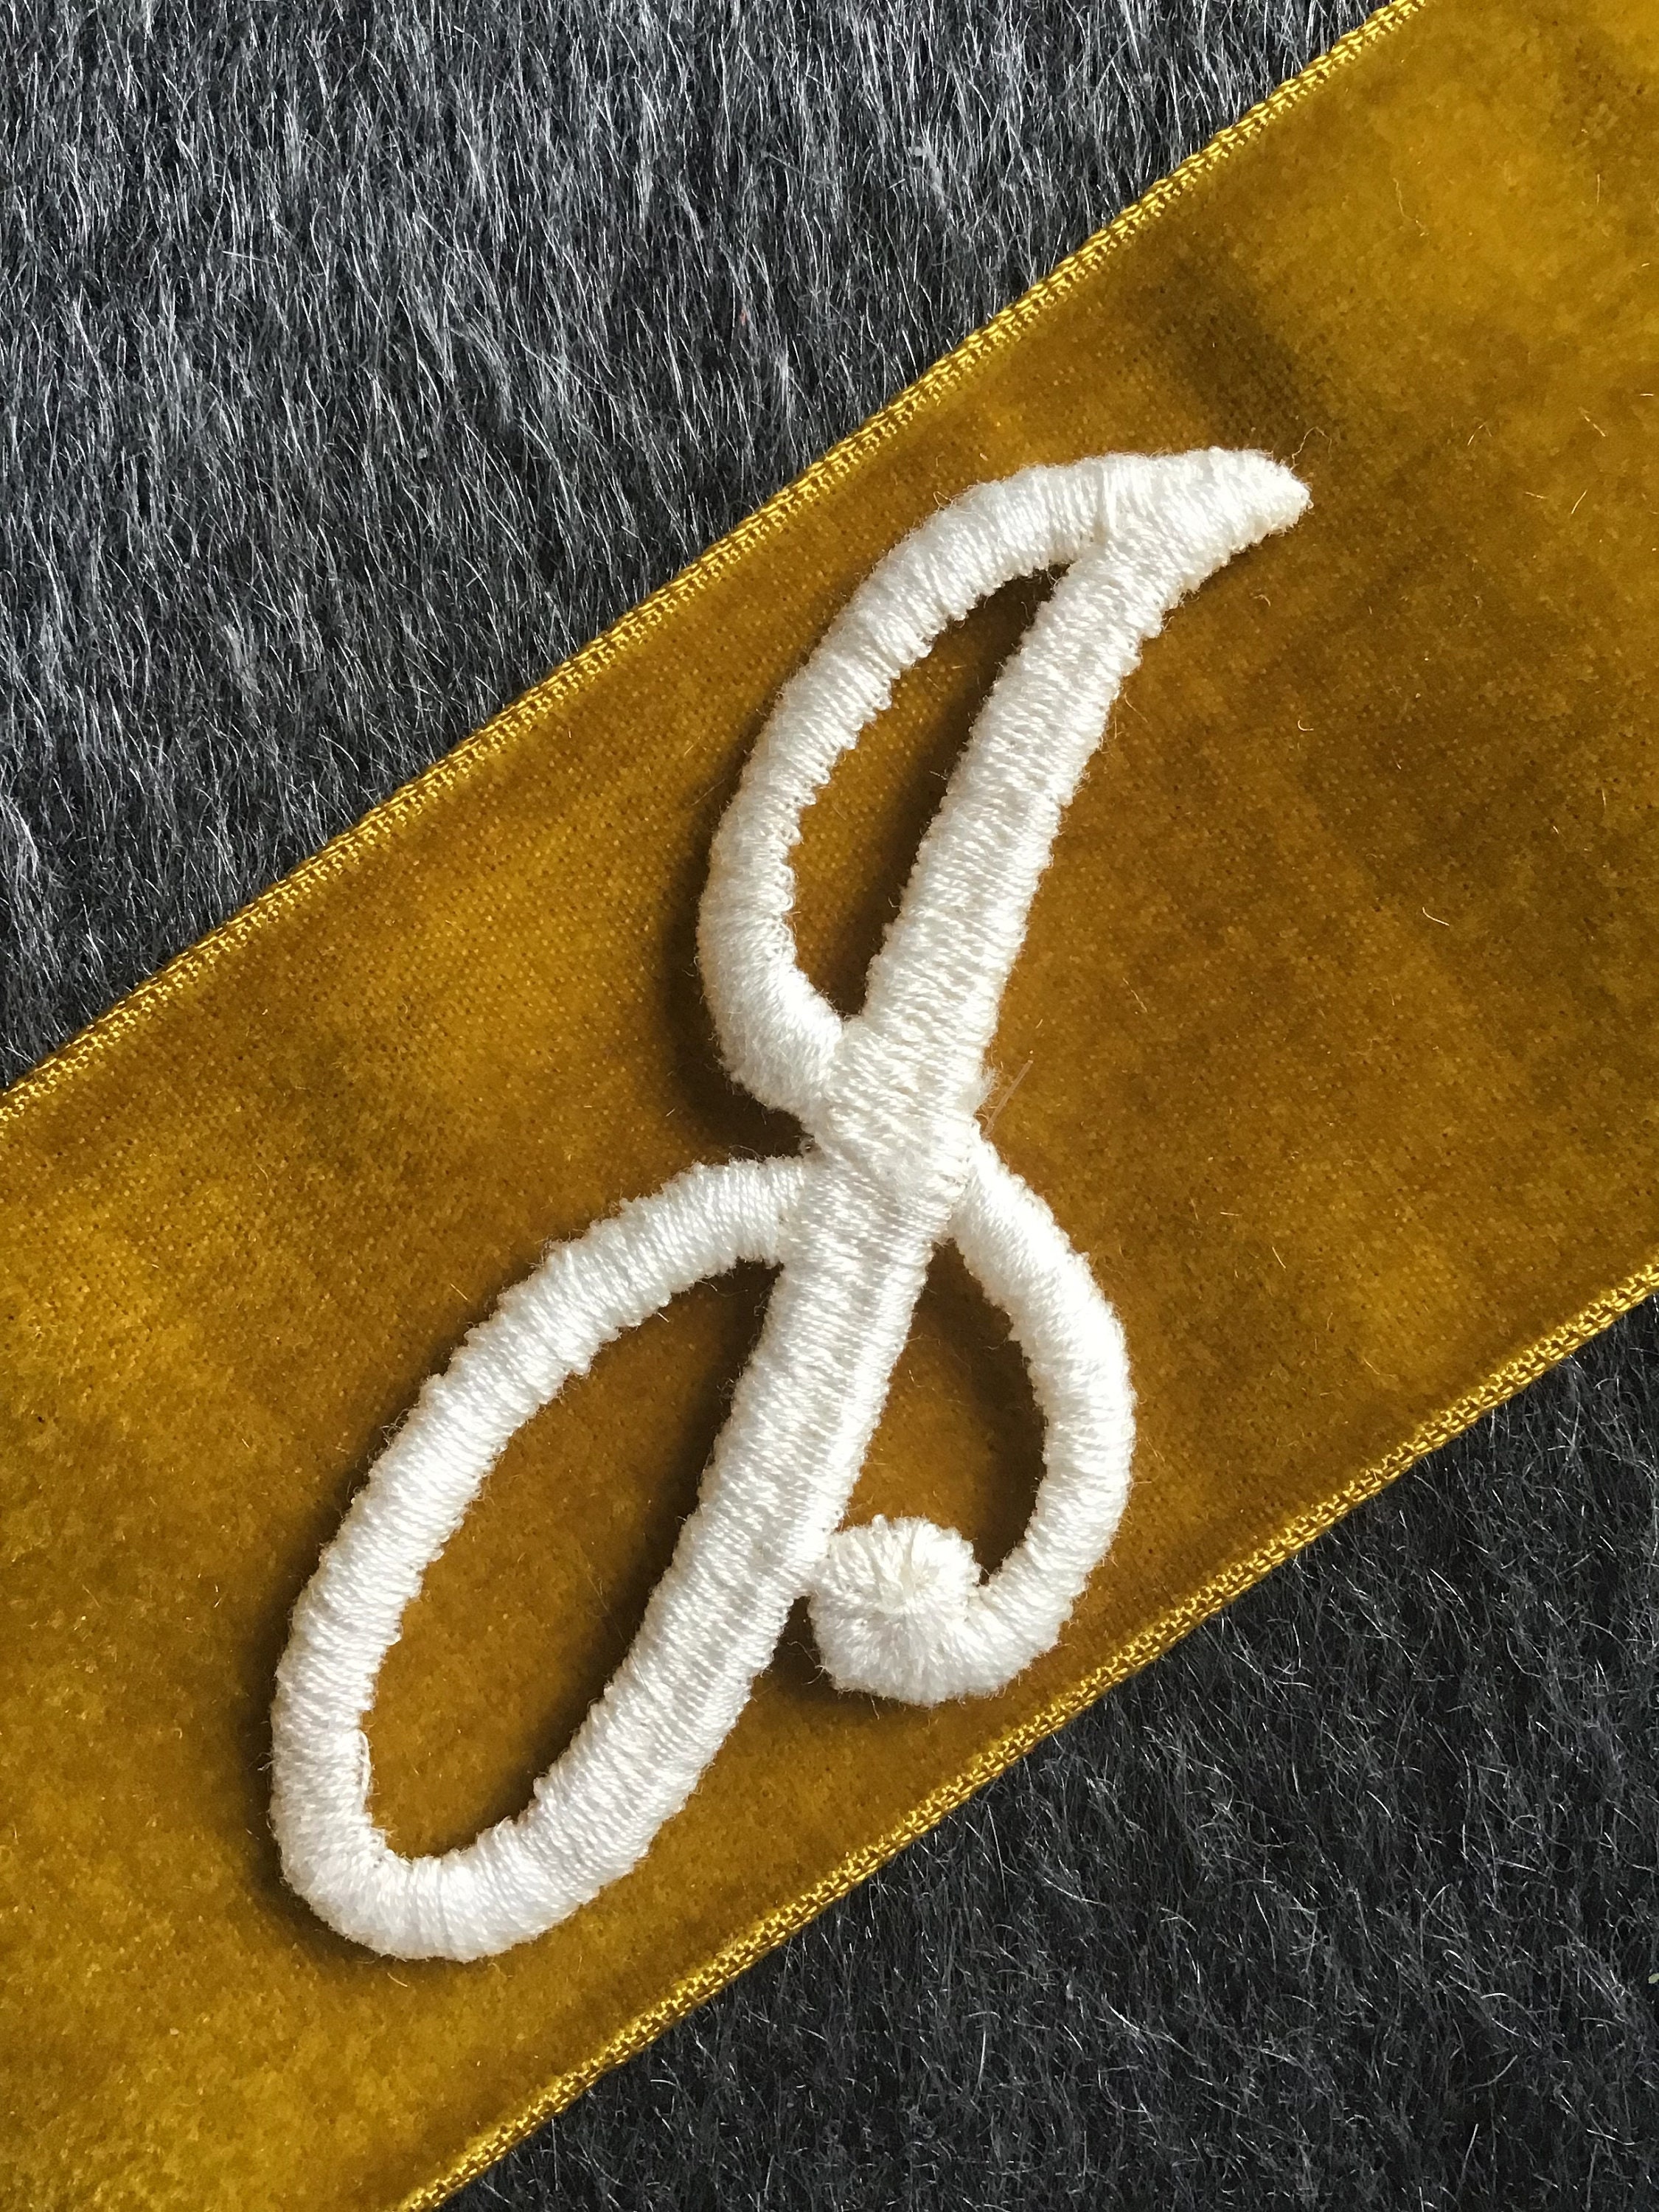 Iron On Embroidery Letters - Yellow O 1 3/8 Tall - Wrights Applique